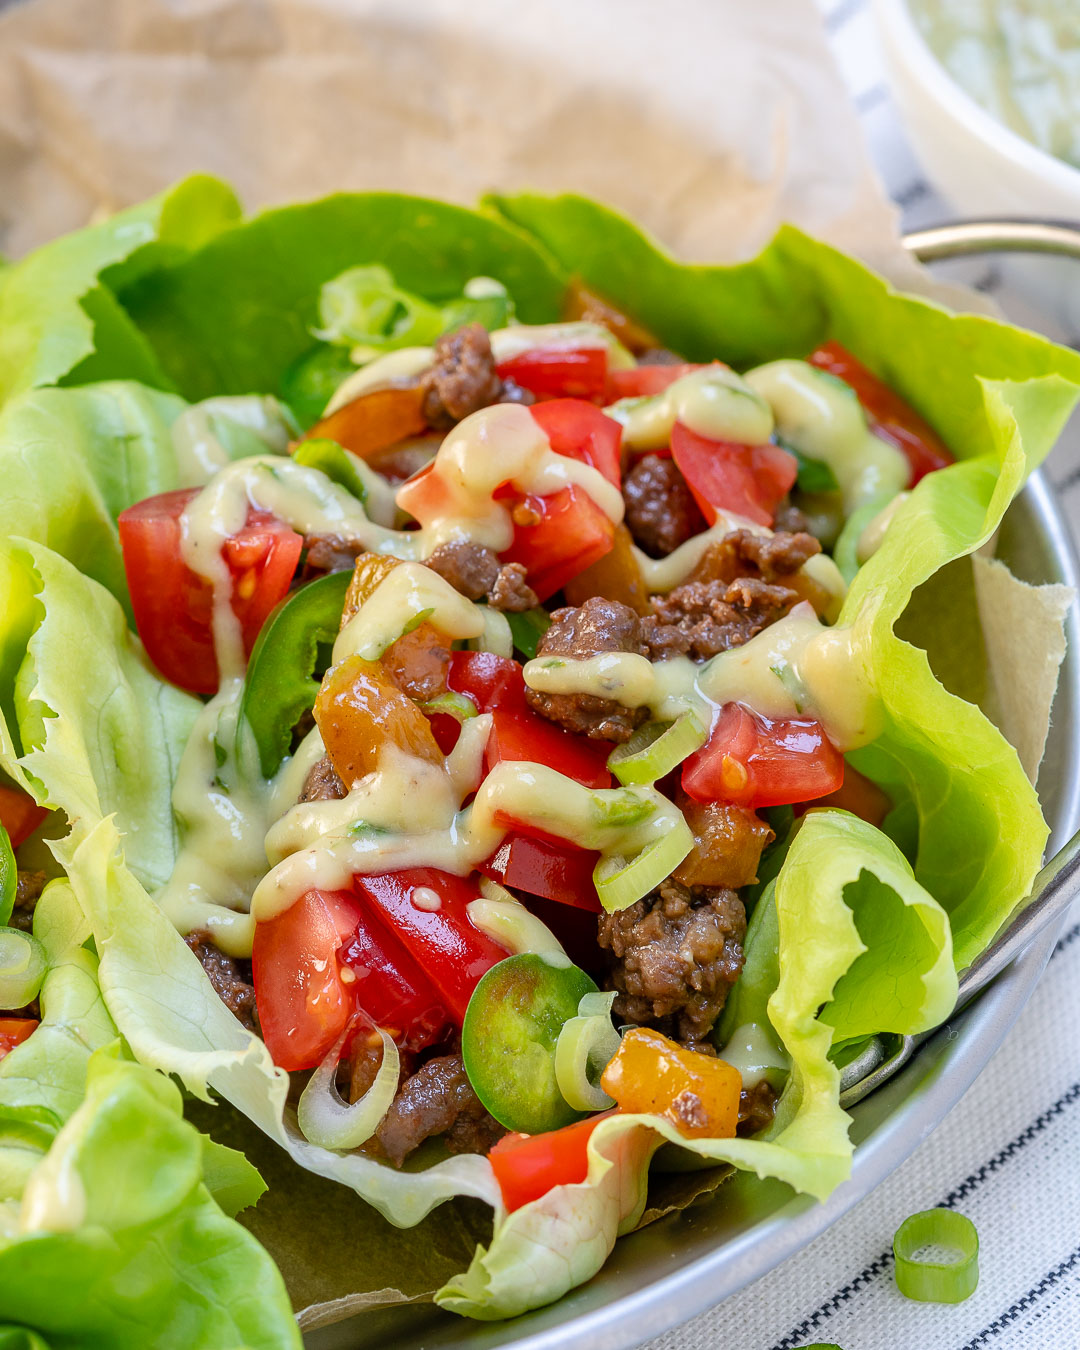 Clean Tangy Grass-fed Beef Lettuce Wraps Ingredients